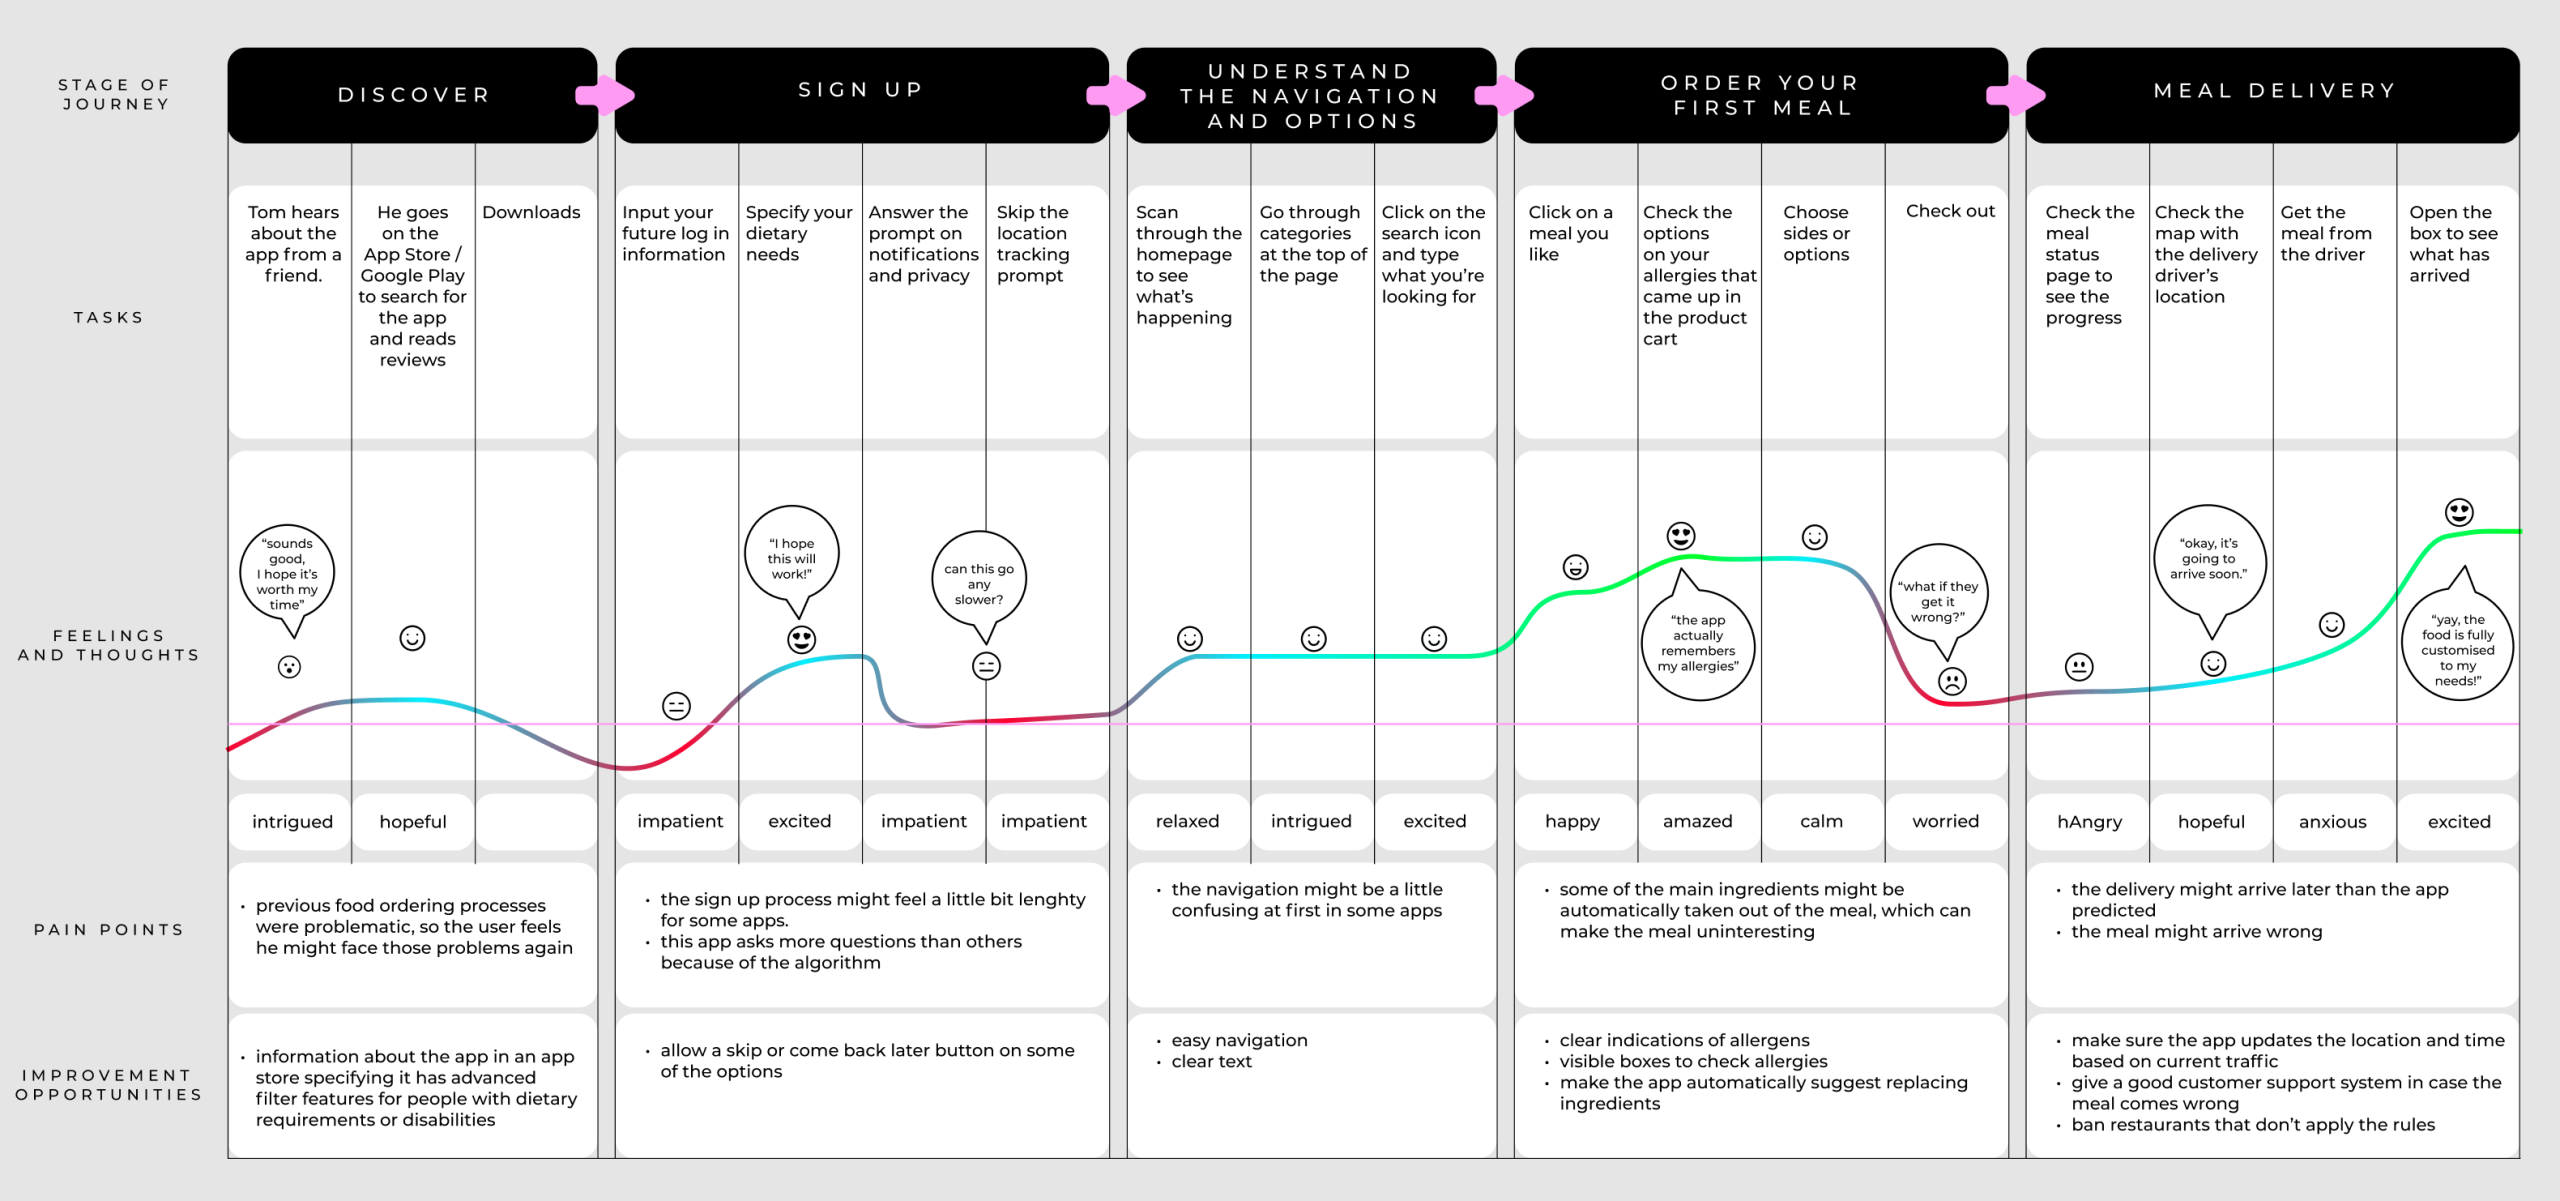 this is an image of a successful customer journey map.